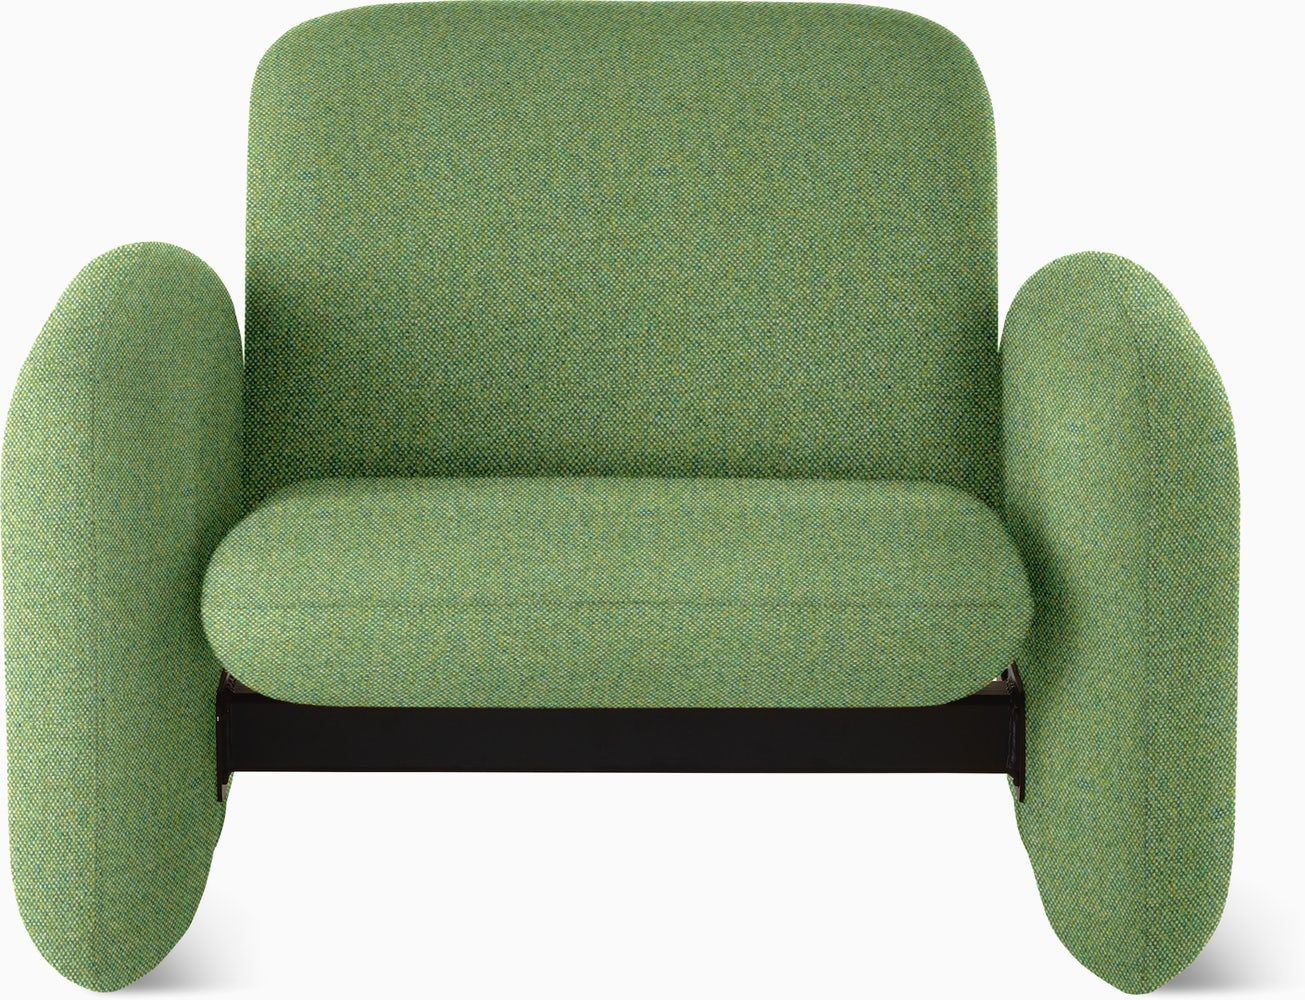 Wilkes Lounge Chair